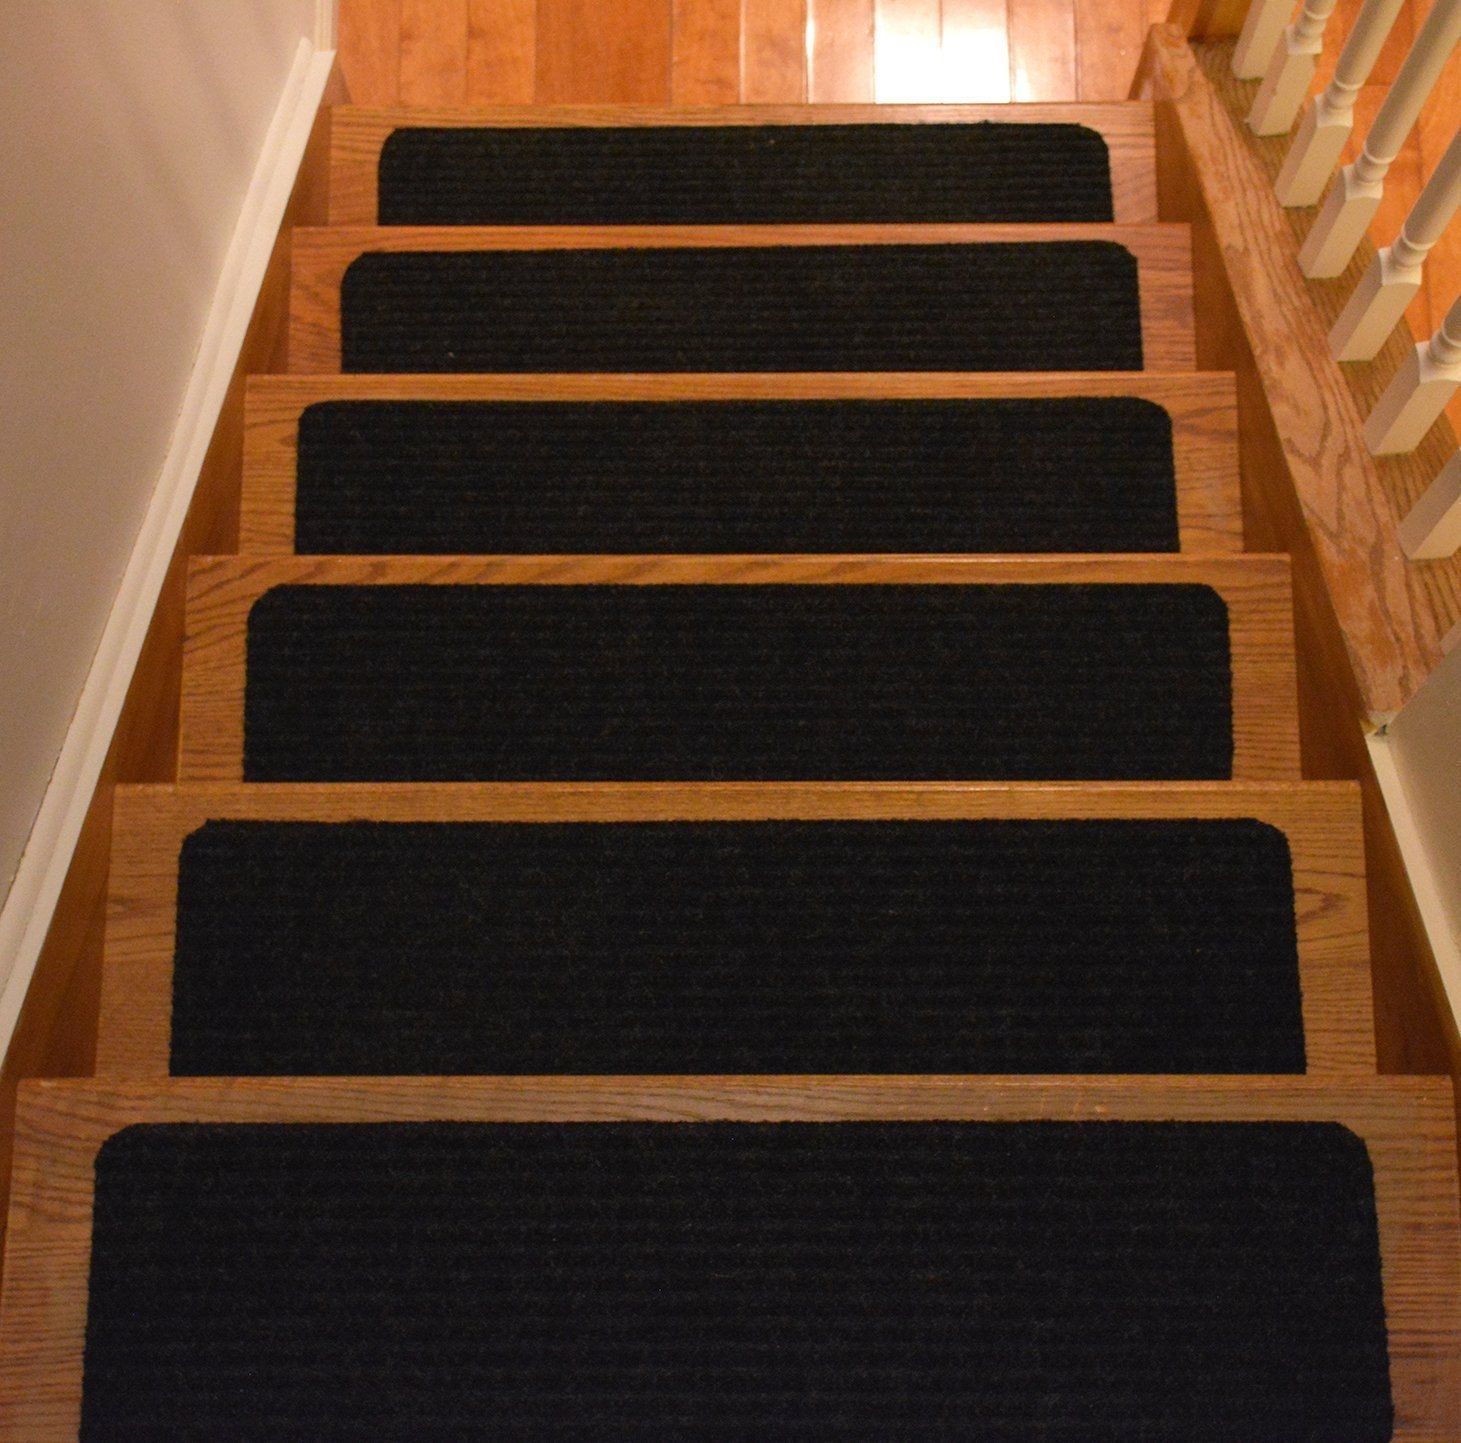 Flooring Pretty Stair Treads Carpet For Stair Decoration Idea Inside Carpet Stair Treads Set Of  (View 15 of 15)